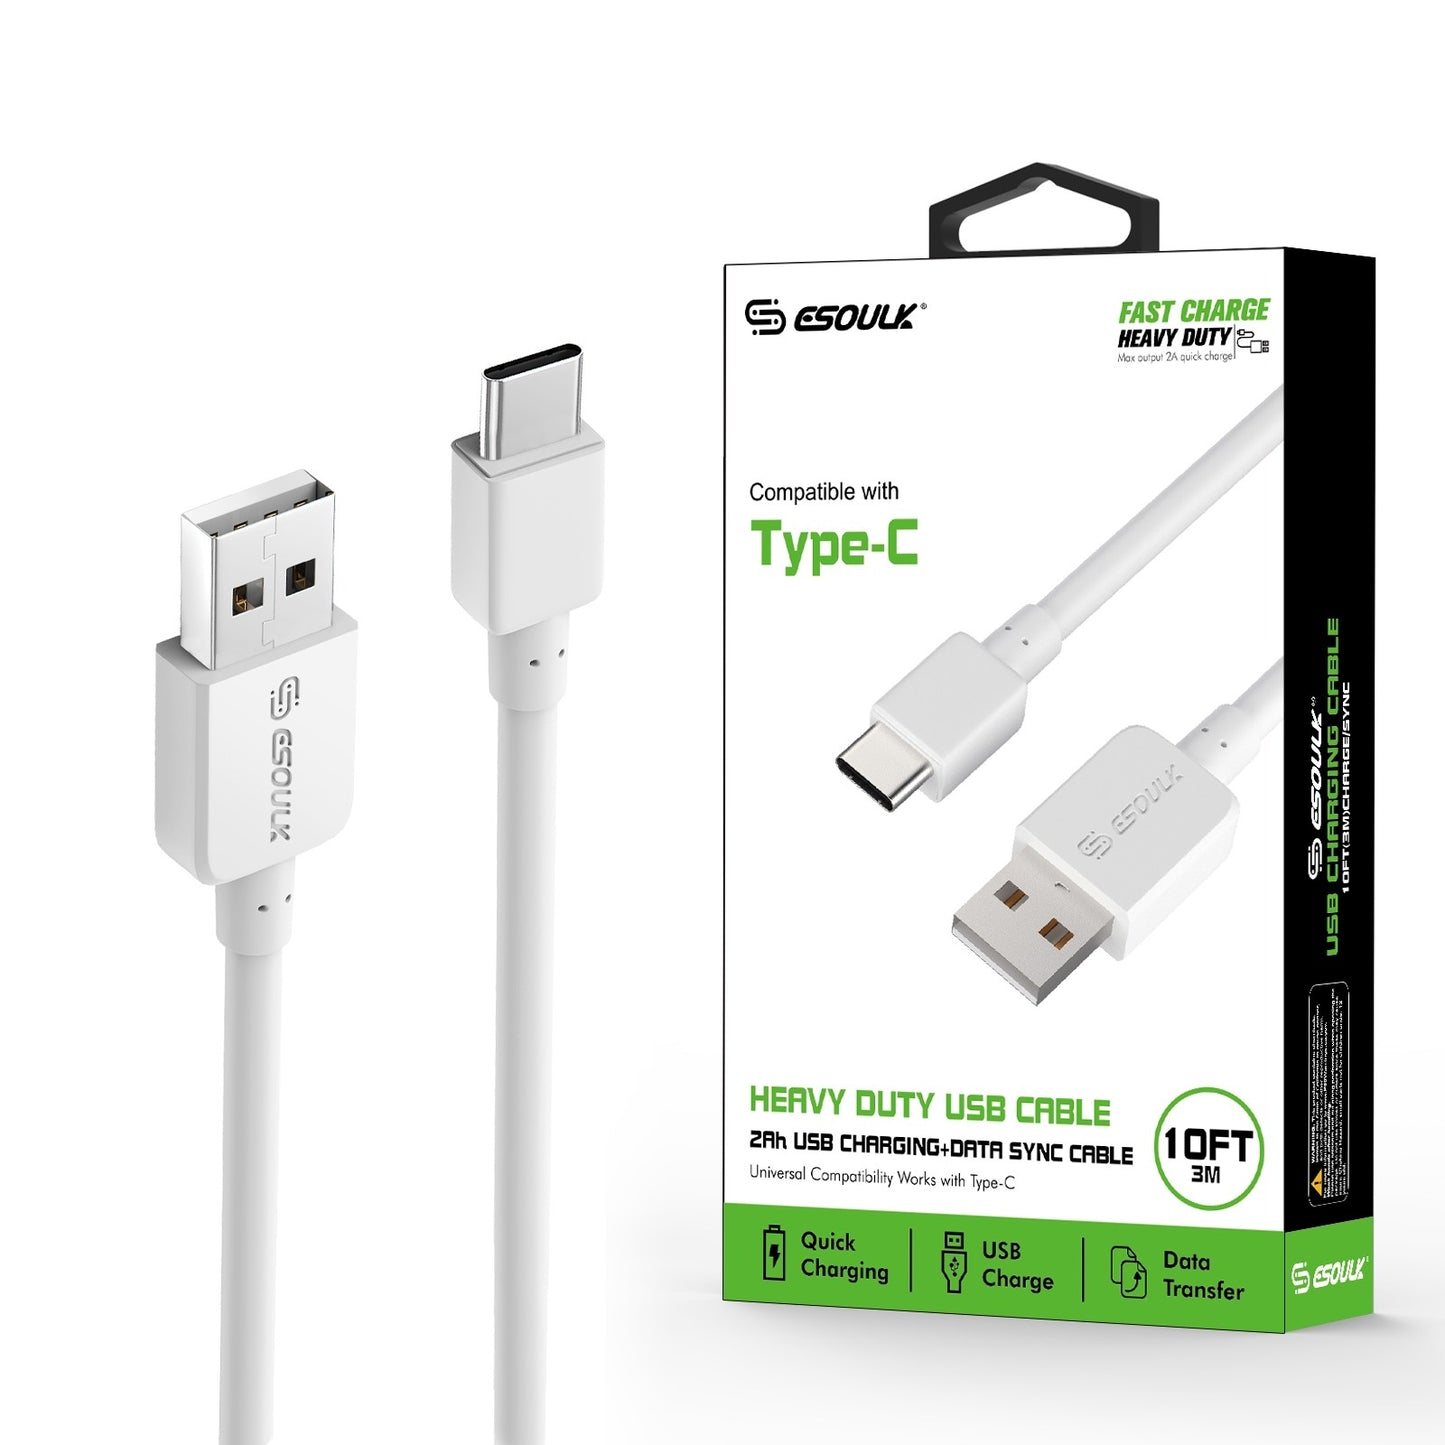 ESOULK 10FT Heavy Duty USB Cable 2A For Type-C White